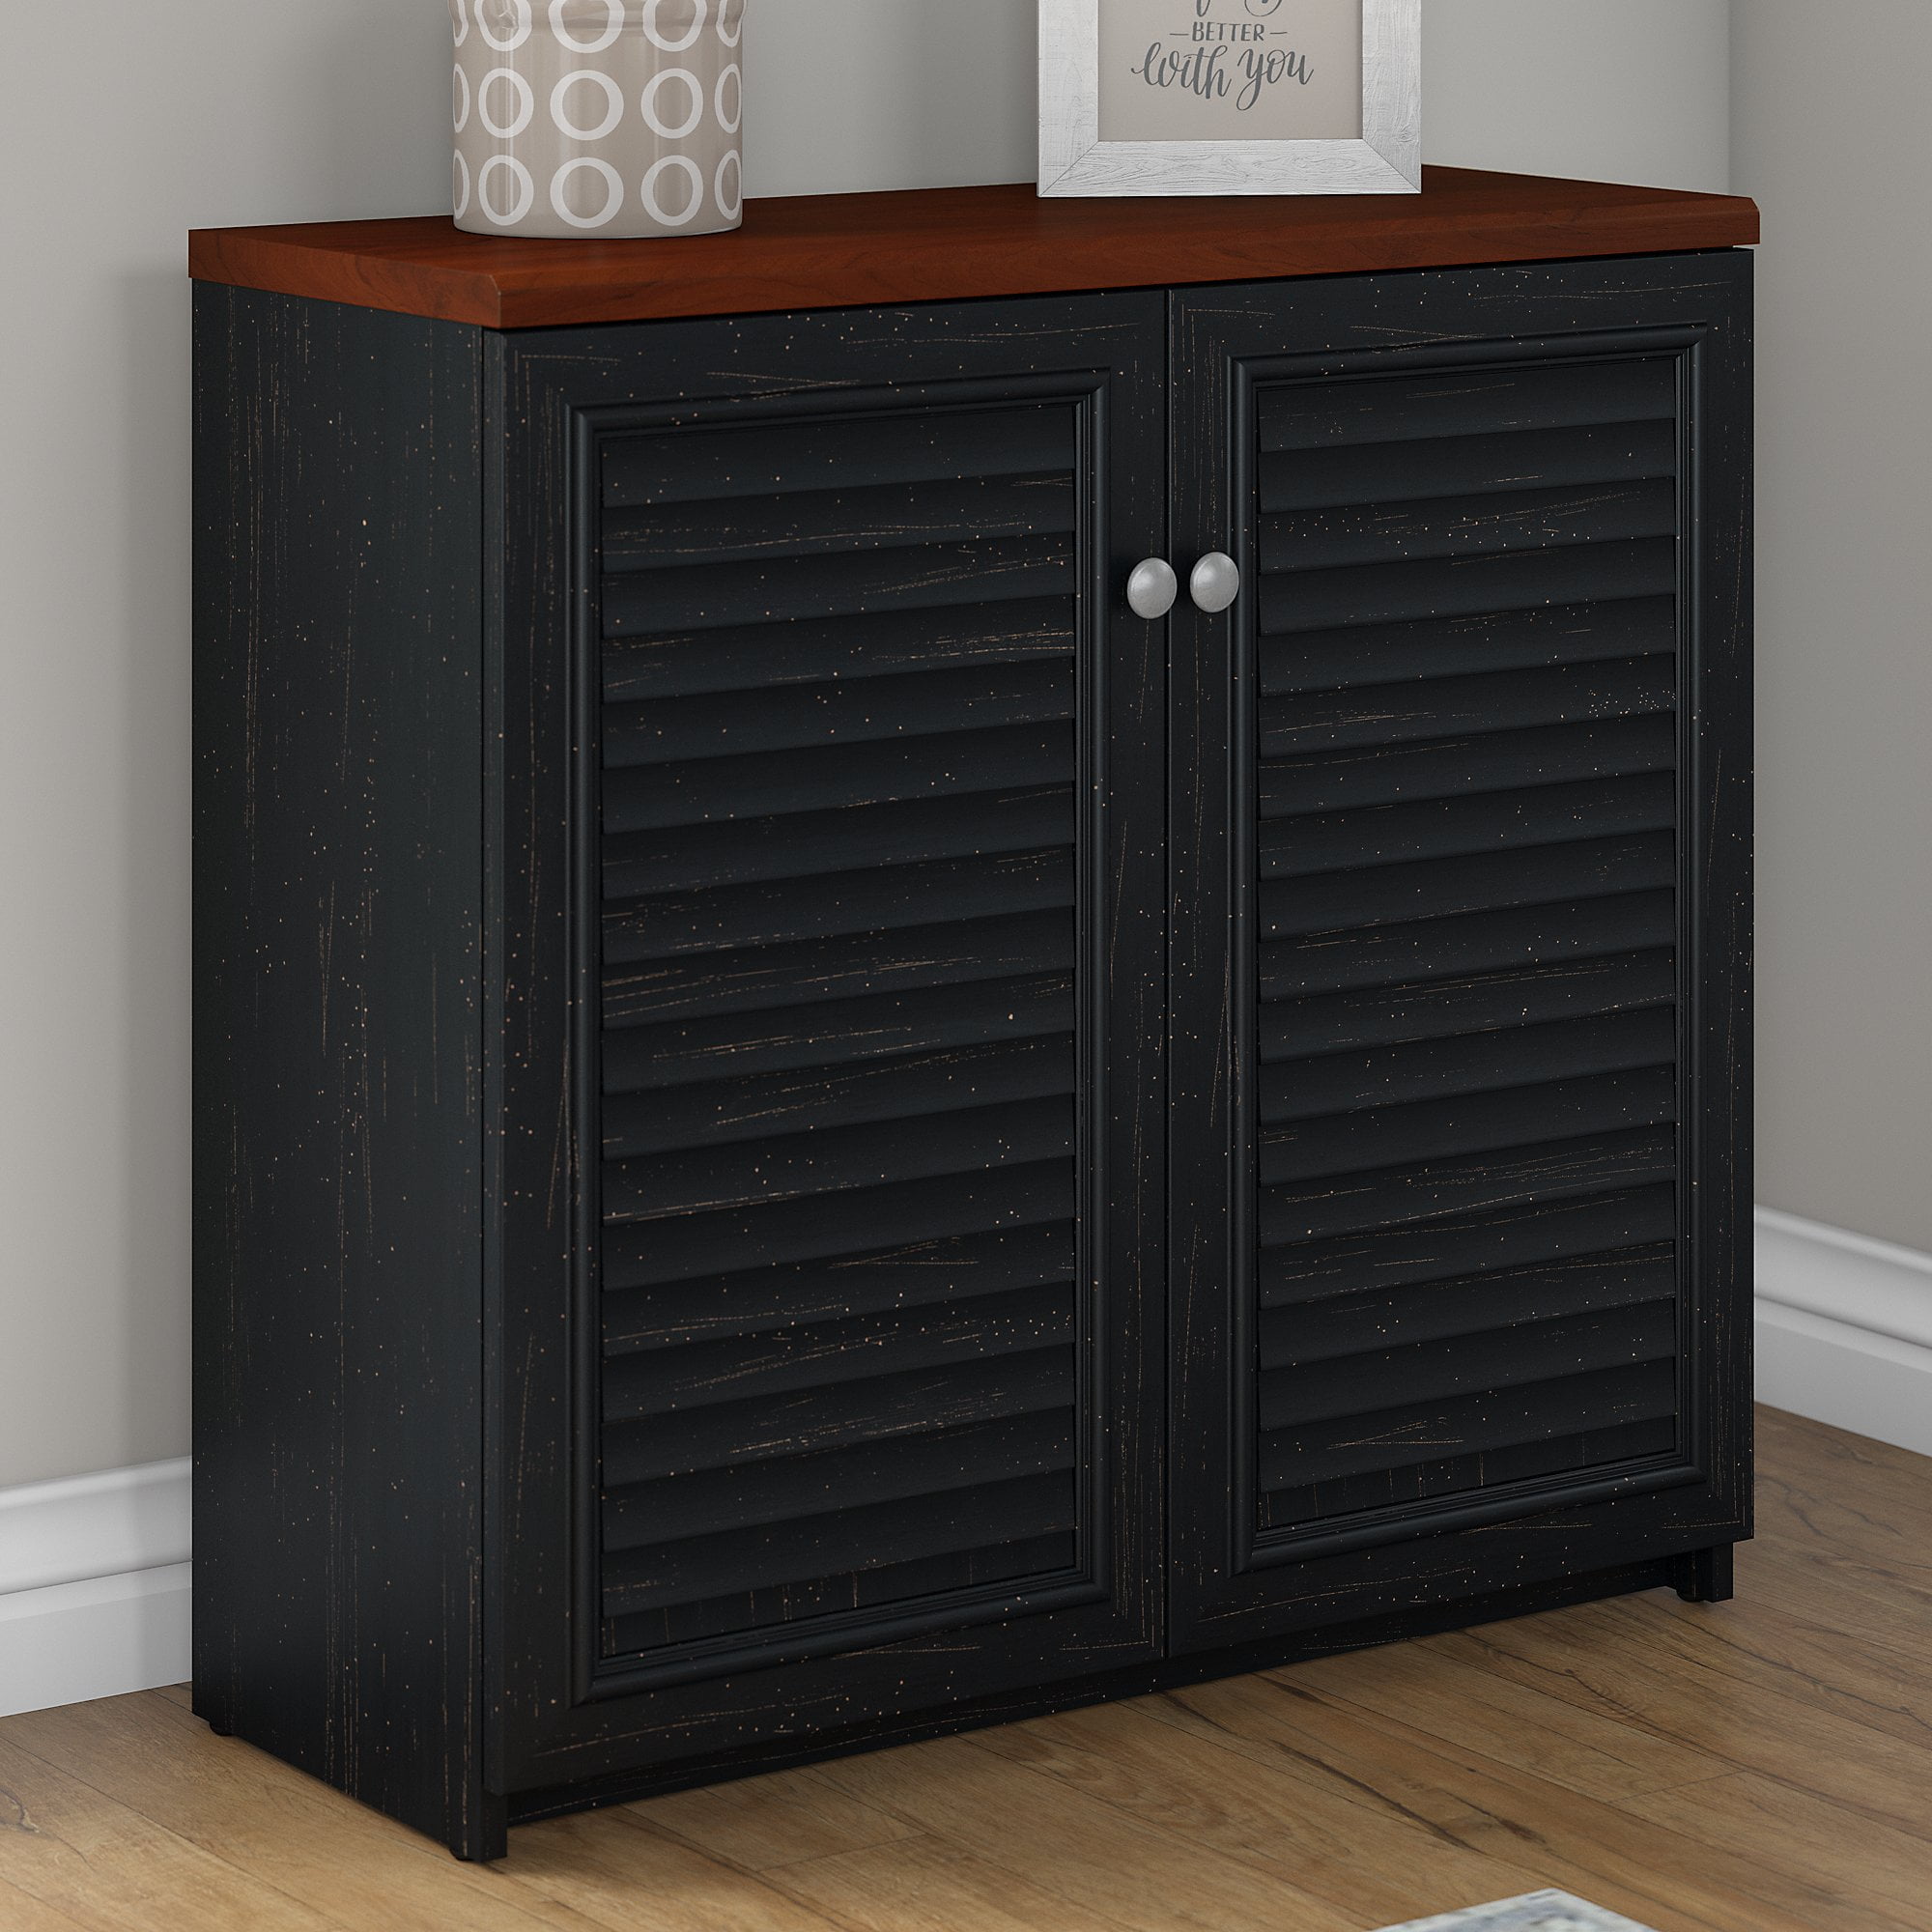 Bush Furniture Fairview Small Storage with Doors in Antique Black and Hansen Cherry